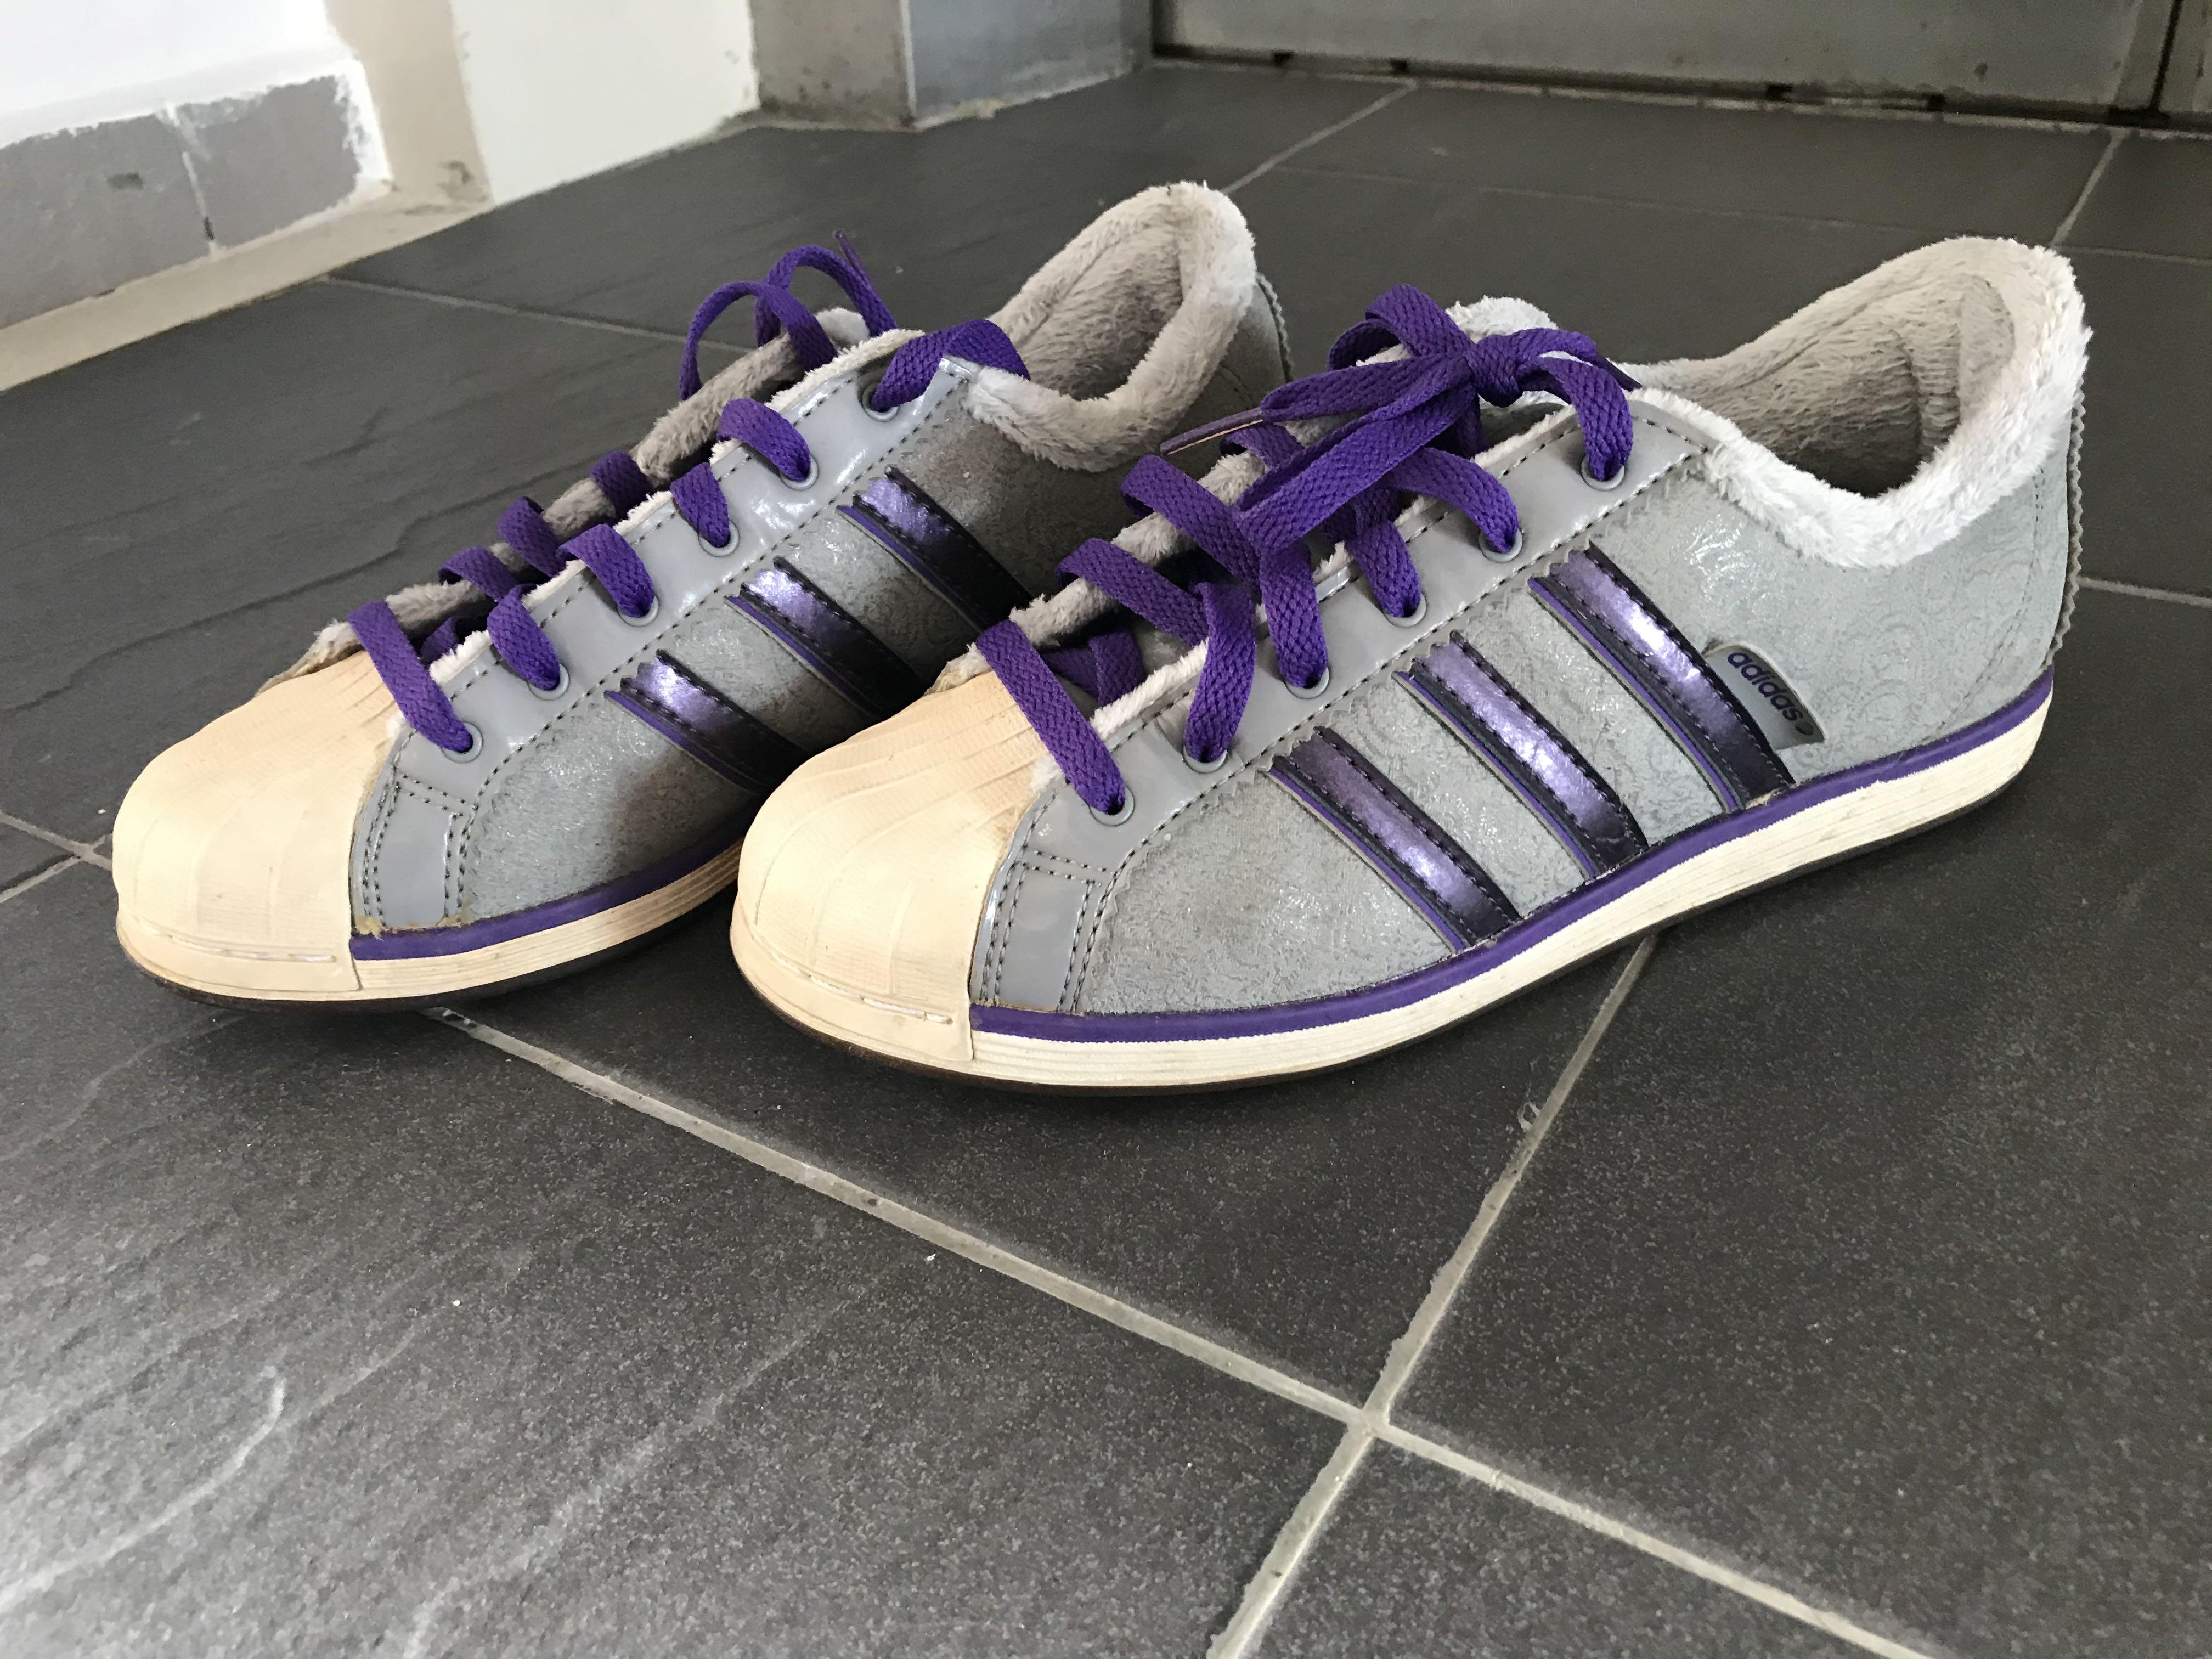 Adidas Neo Label Vibetouch Shoes Advanced System Womens Size Yoga Training Running Walking Hiking Sneakers Leather Purple Shiny 3 Stripes / Suitable for both Adult / Teenager / Kids,